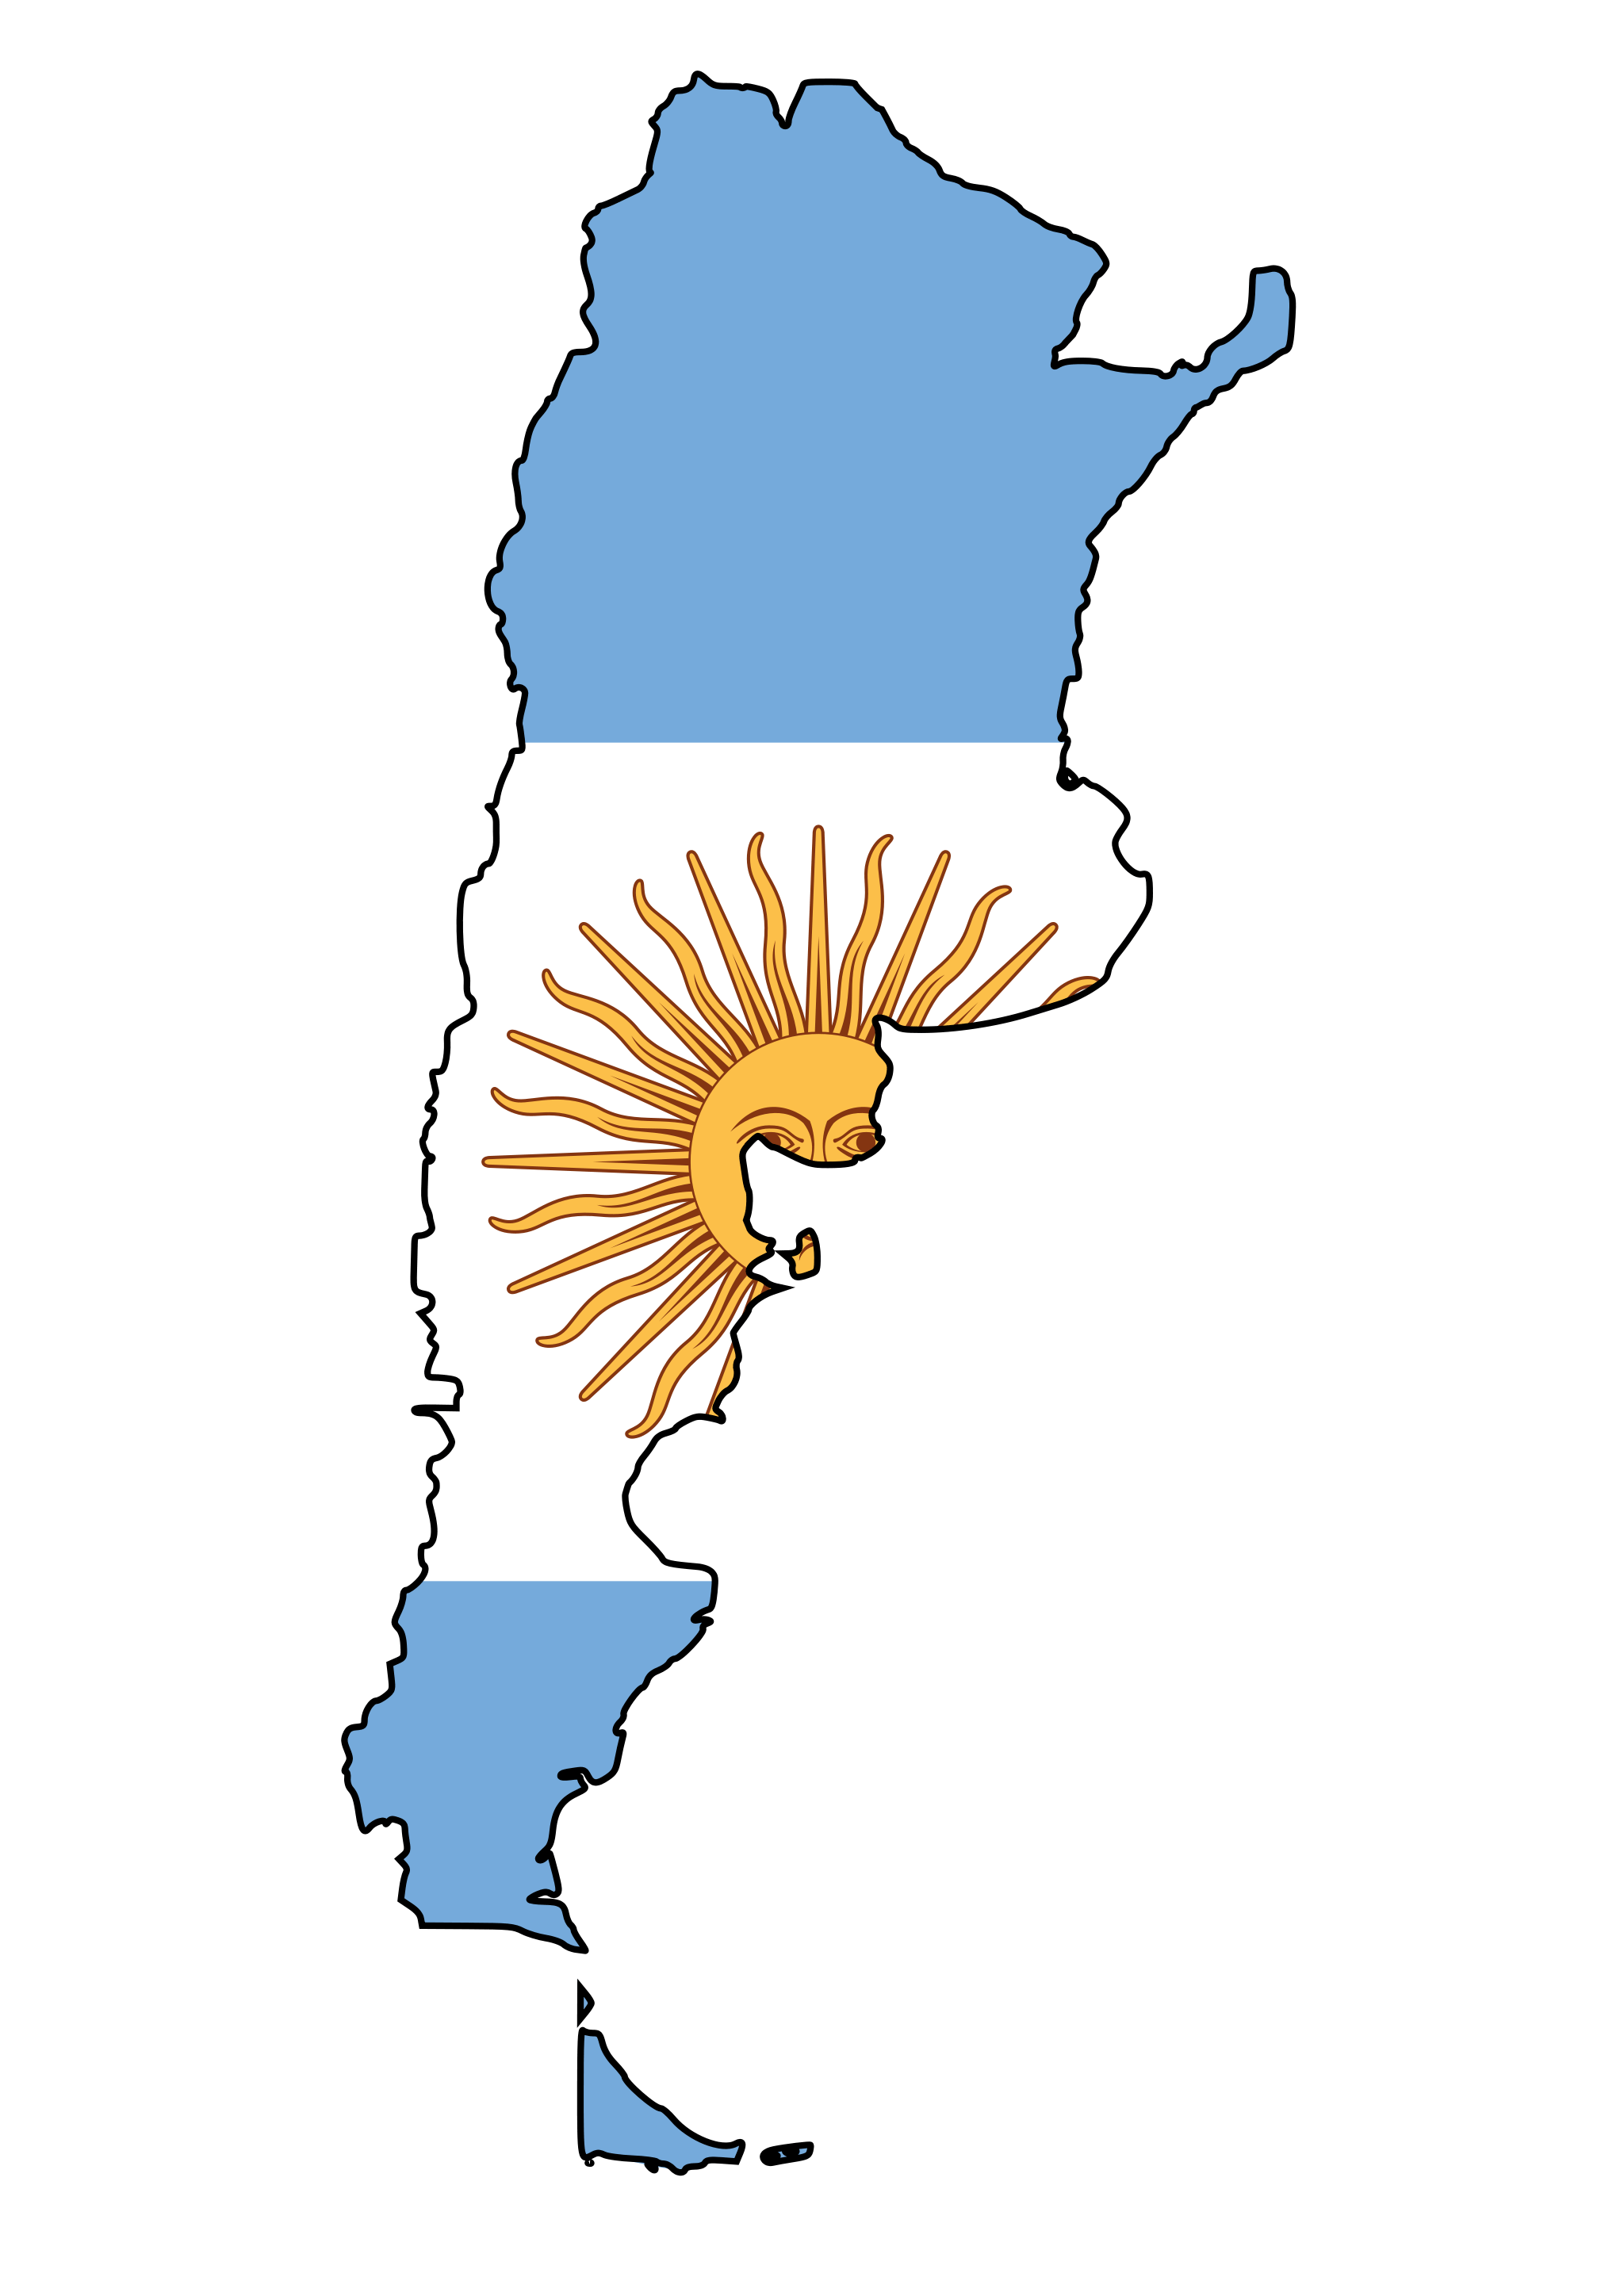 Go To Argentina & Get 33% More Money Free Right Now | 1 USD = 12.4